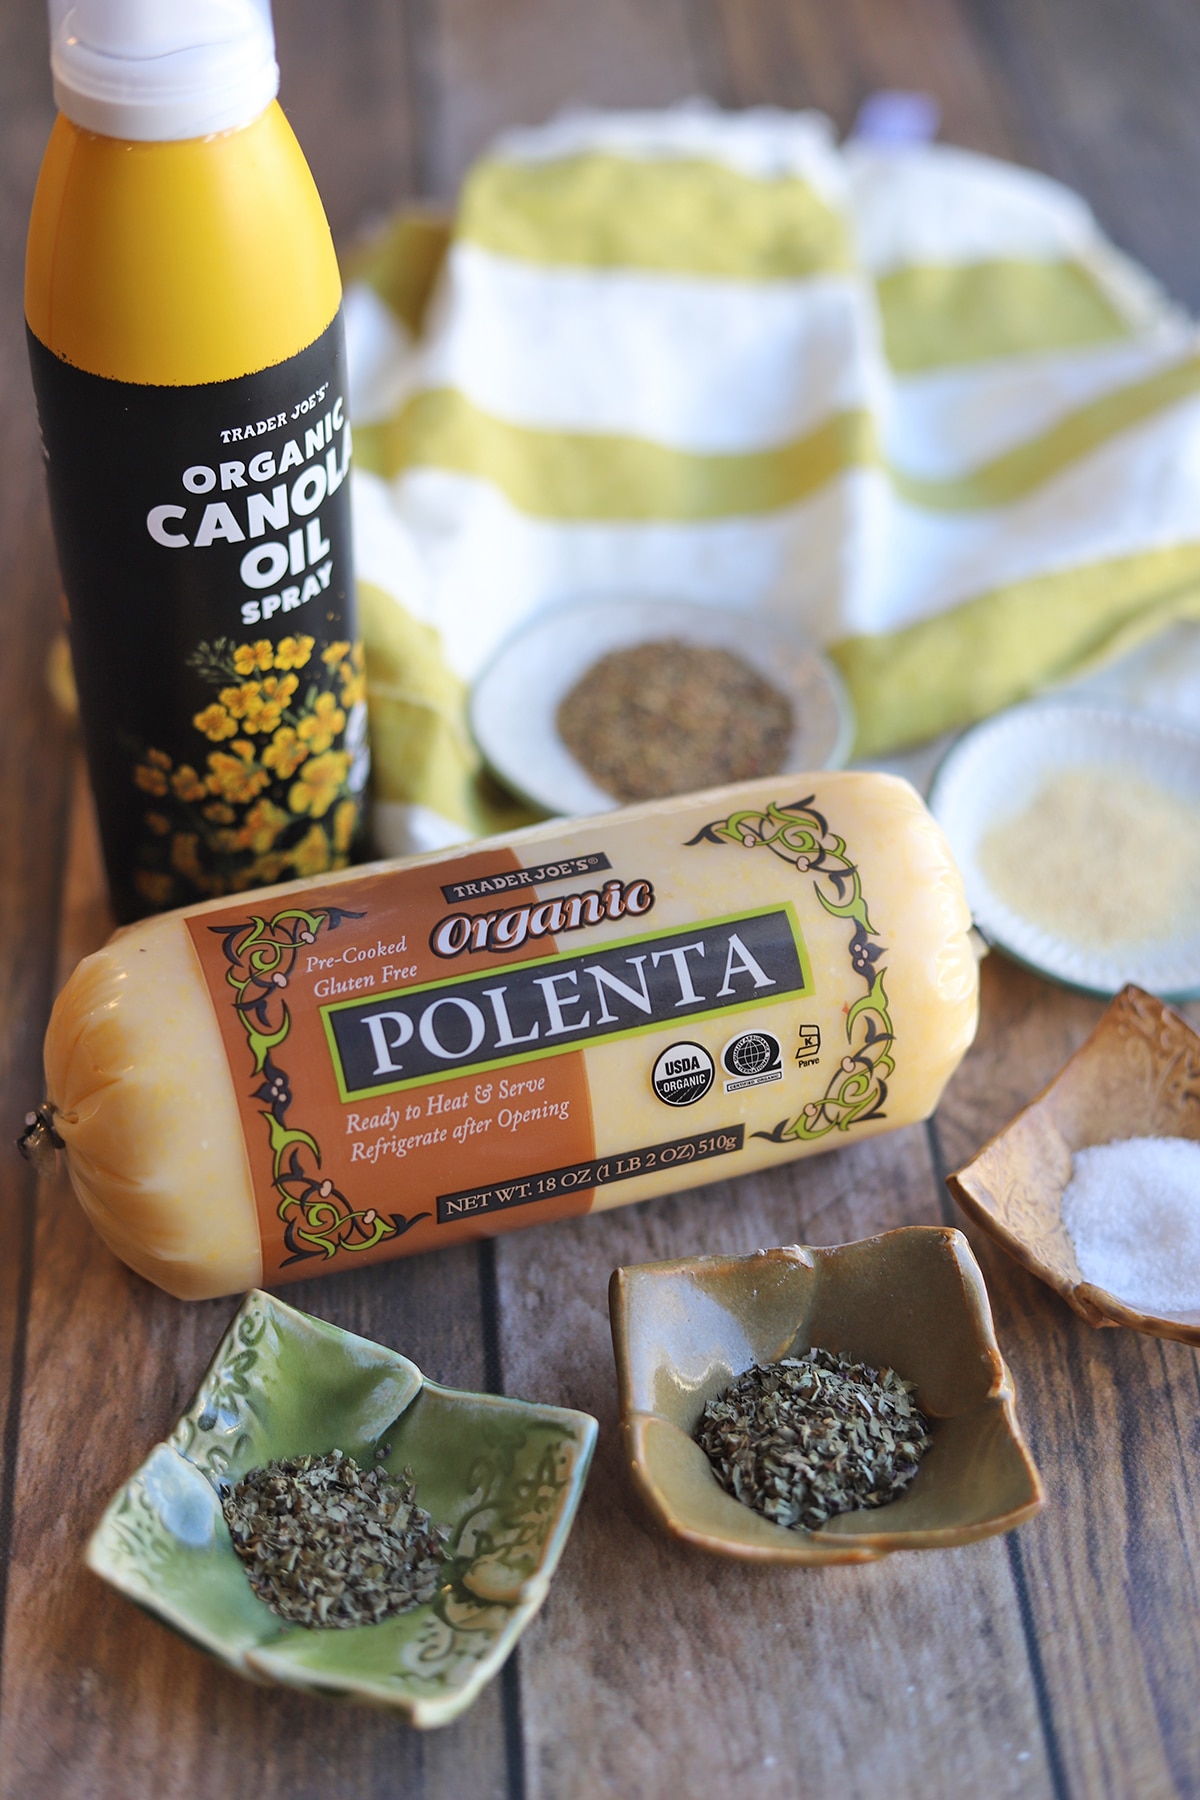 Chub of prepared polenta with oil spray, and spices on table.